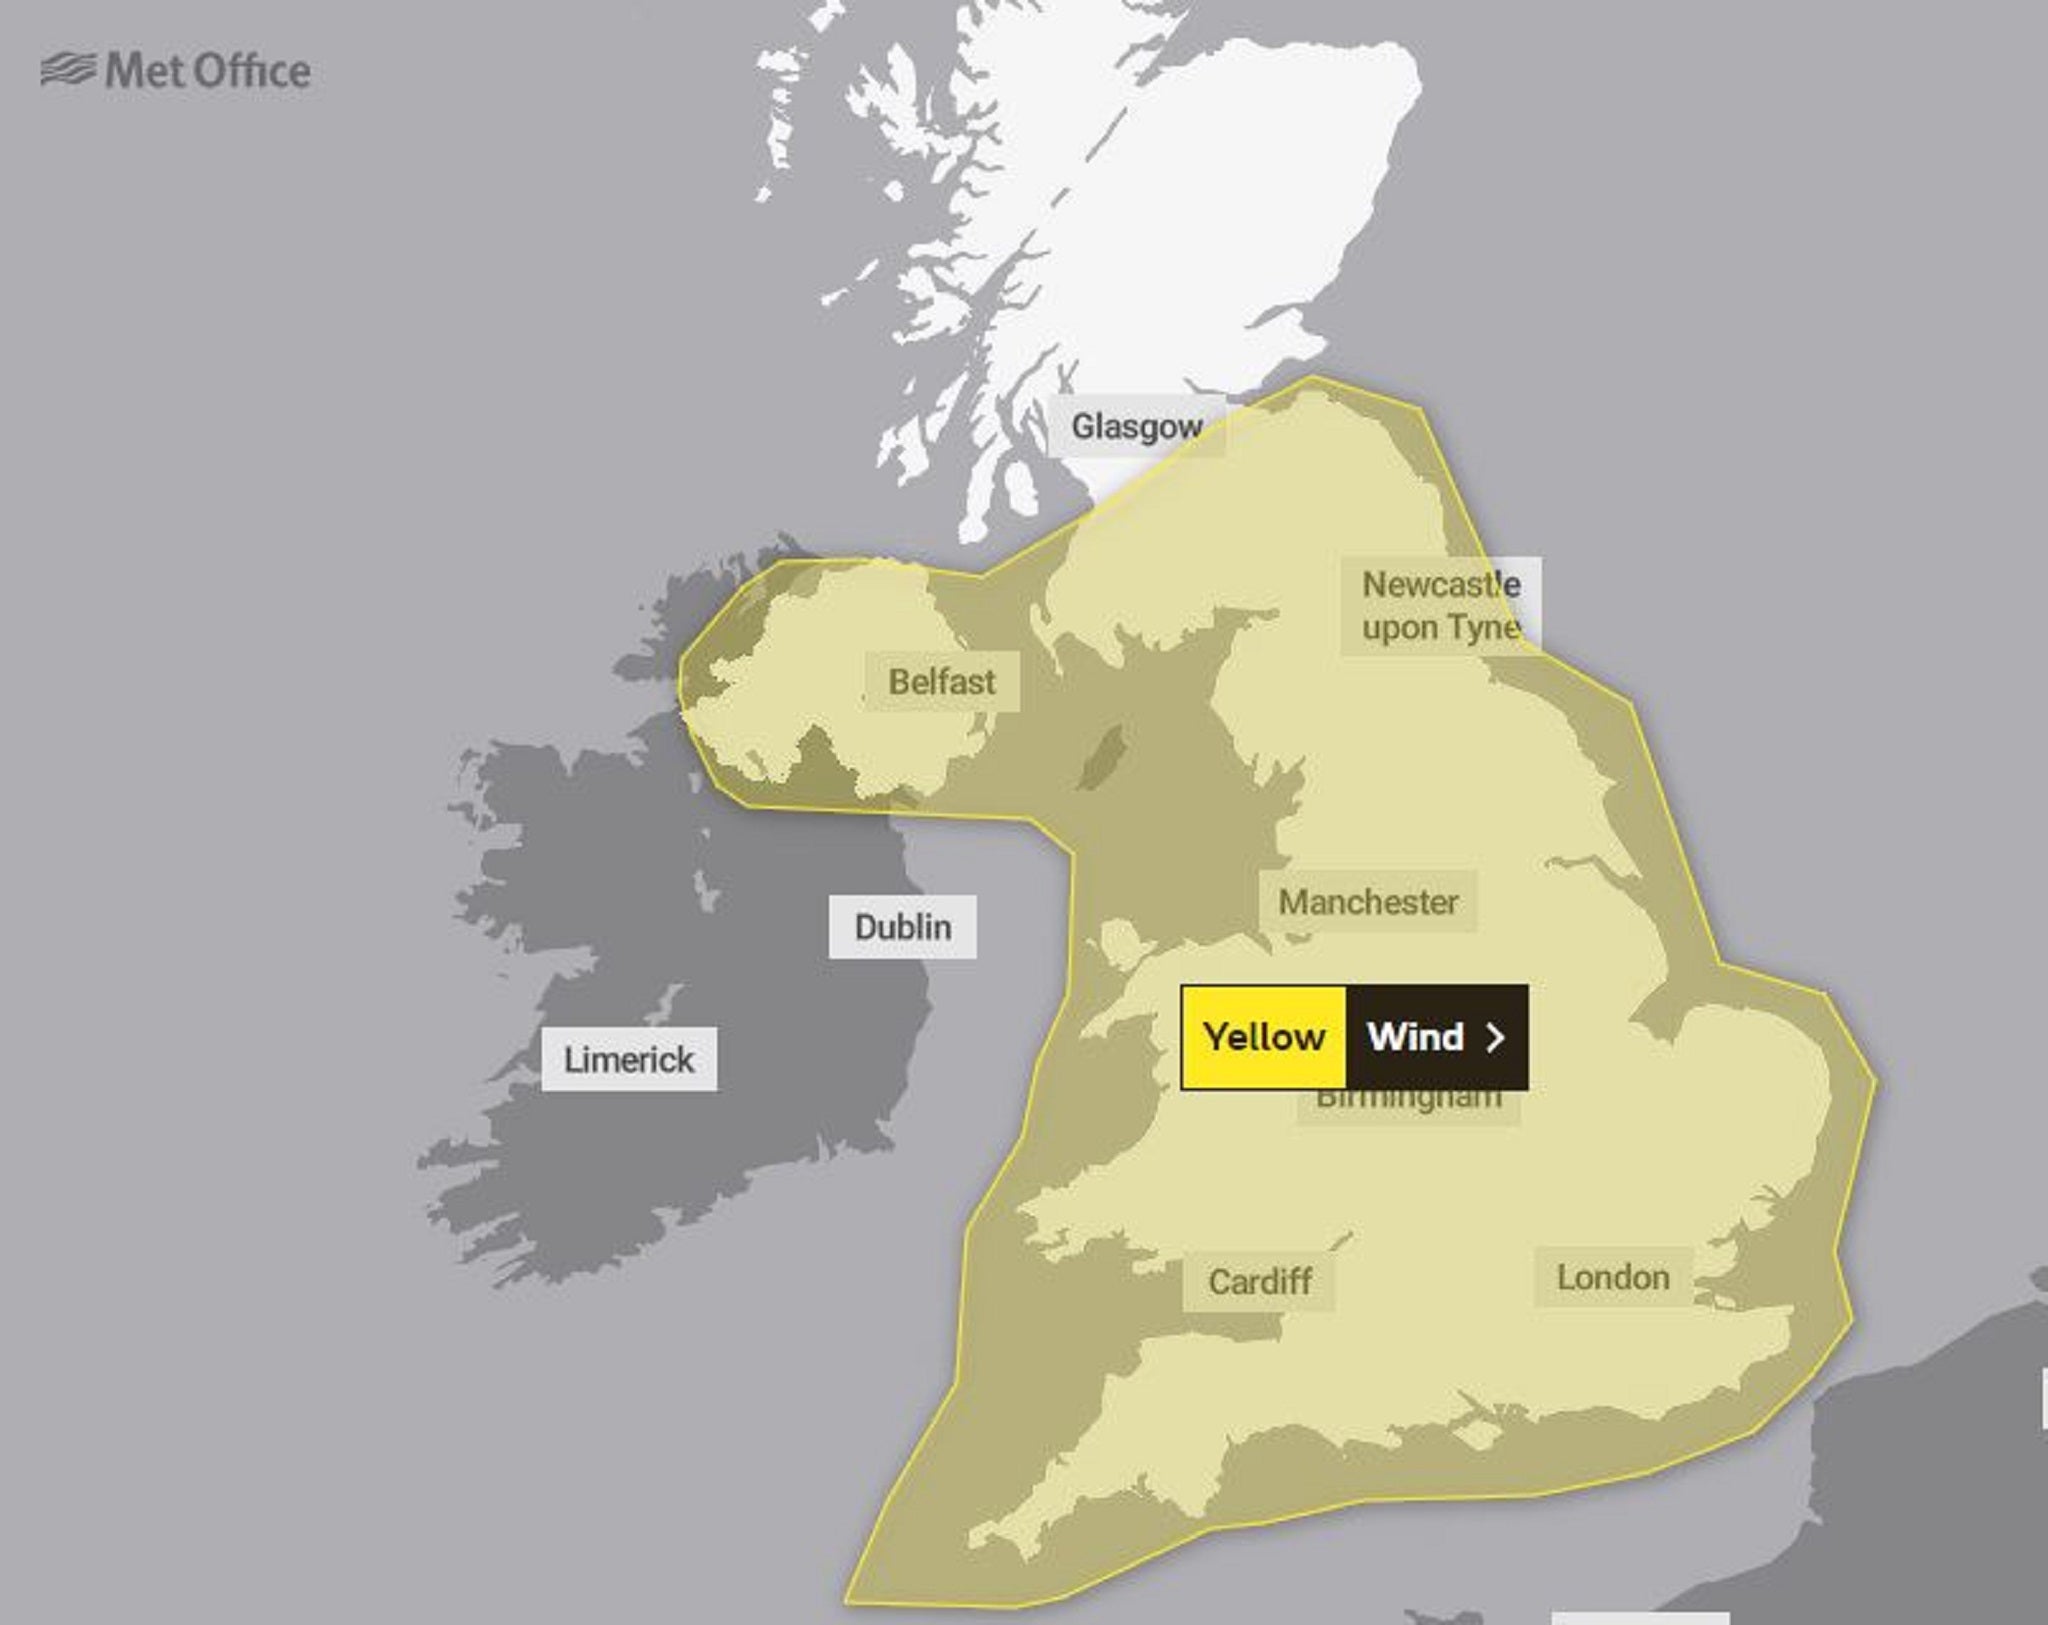 Weather warnings for wind have been issued for much of the UK on Friday ahead of Storm Eunice